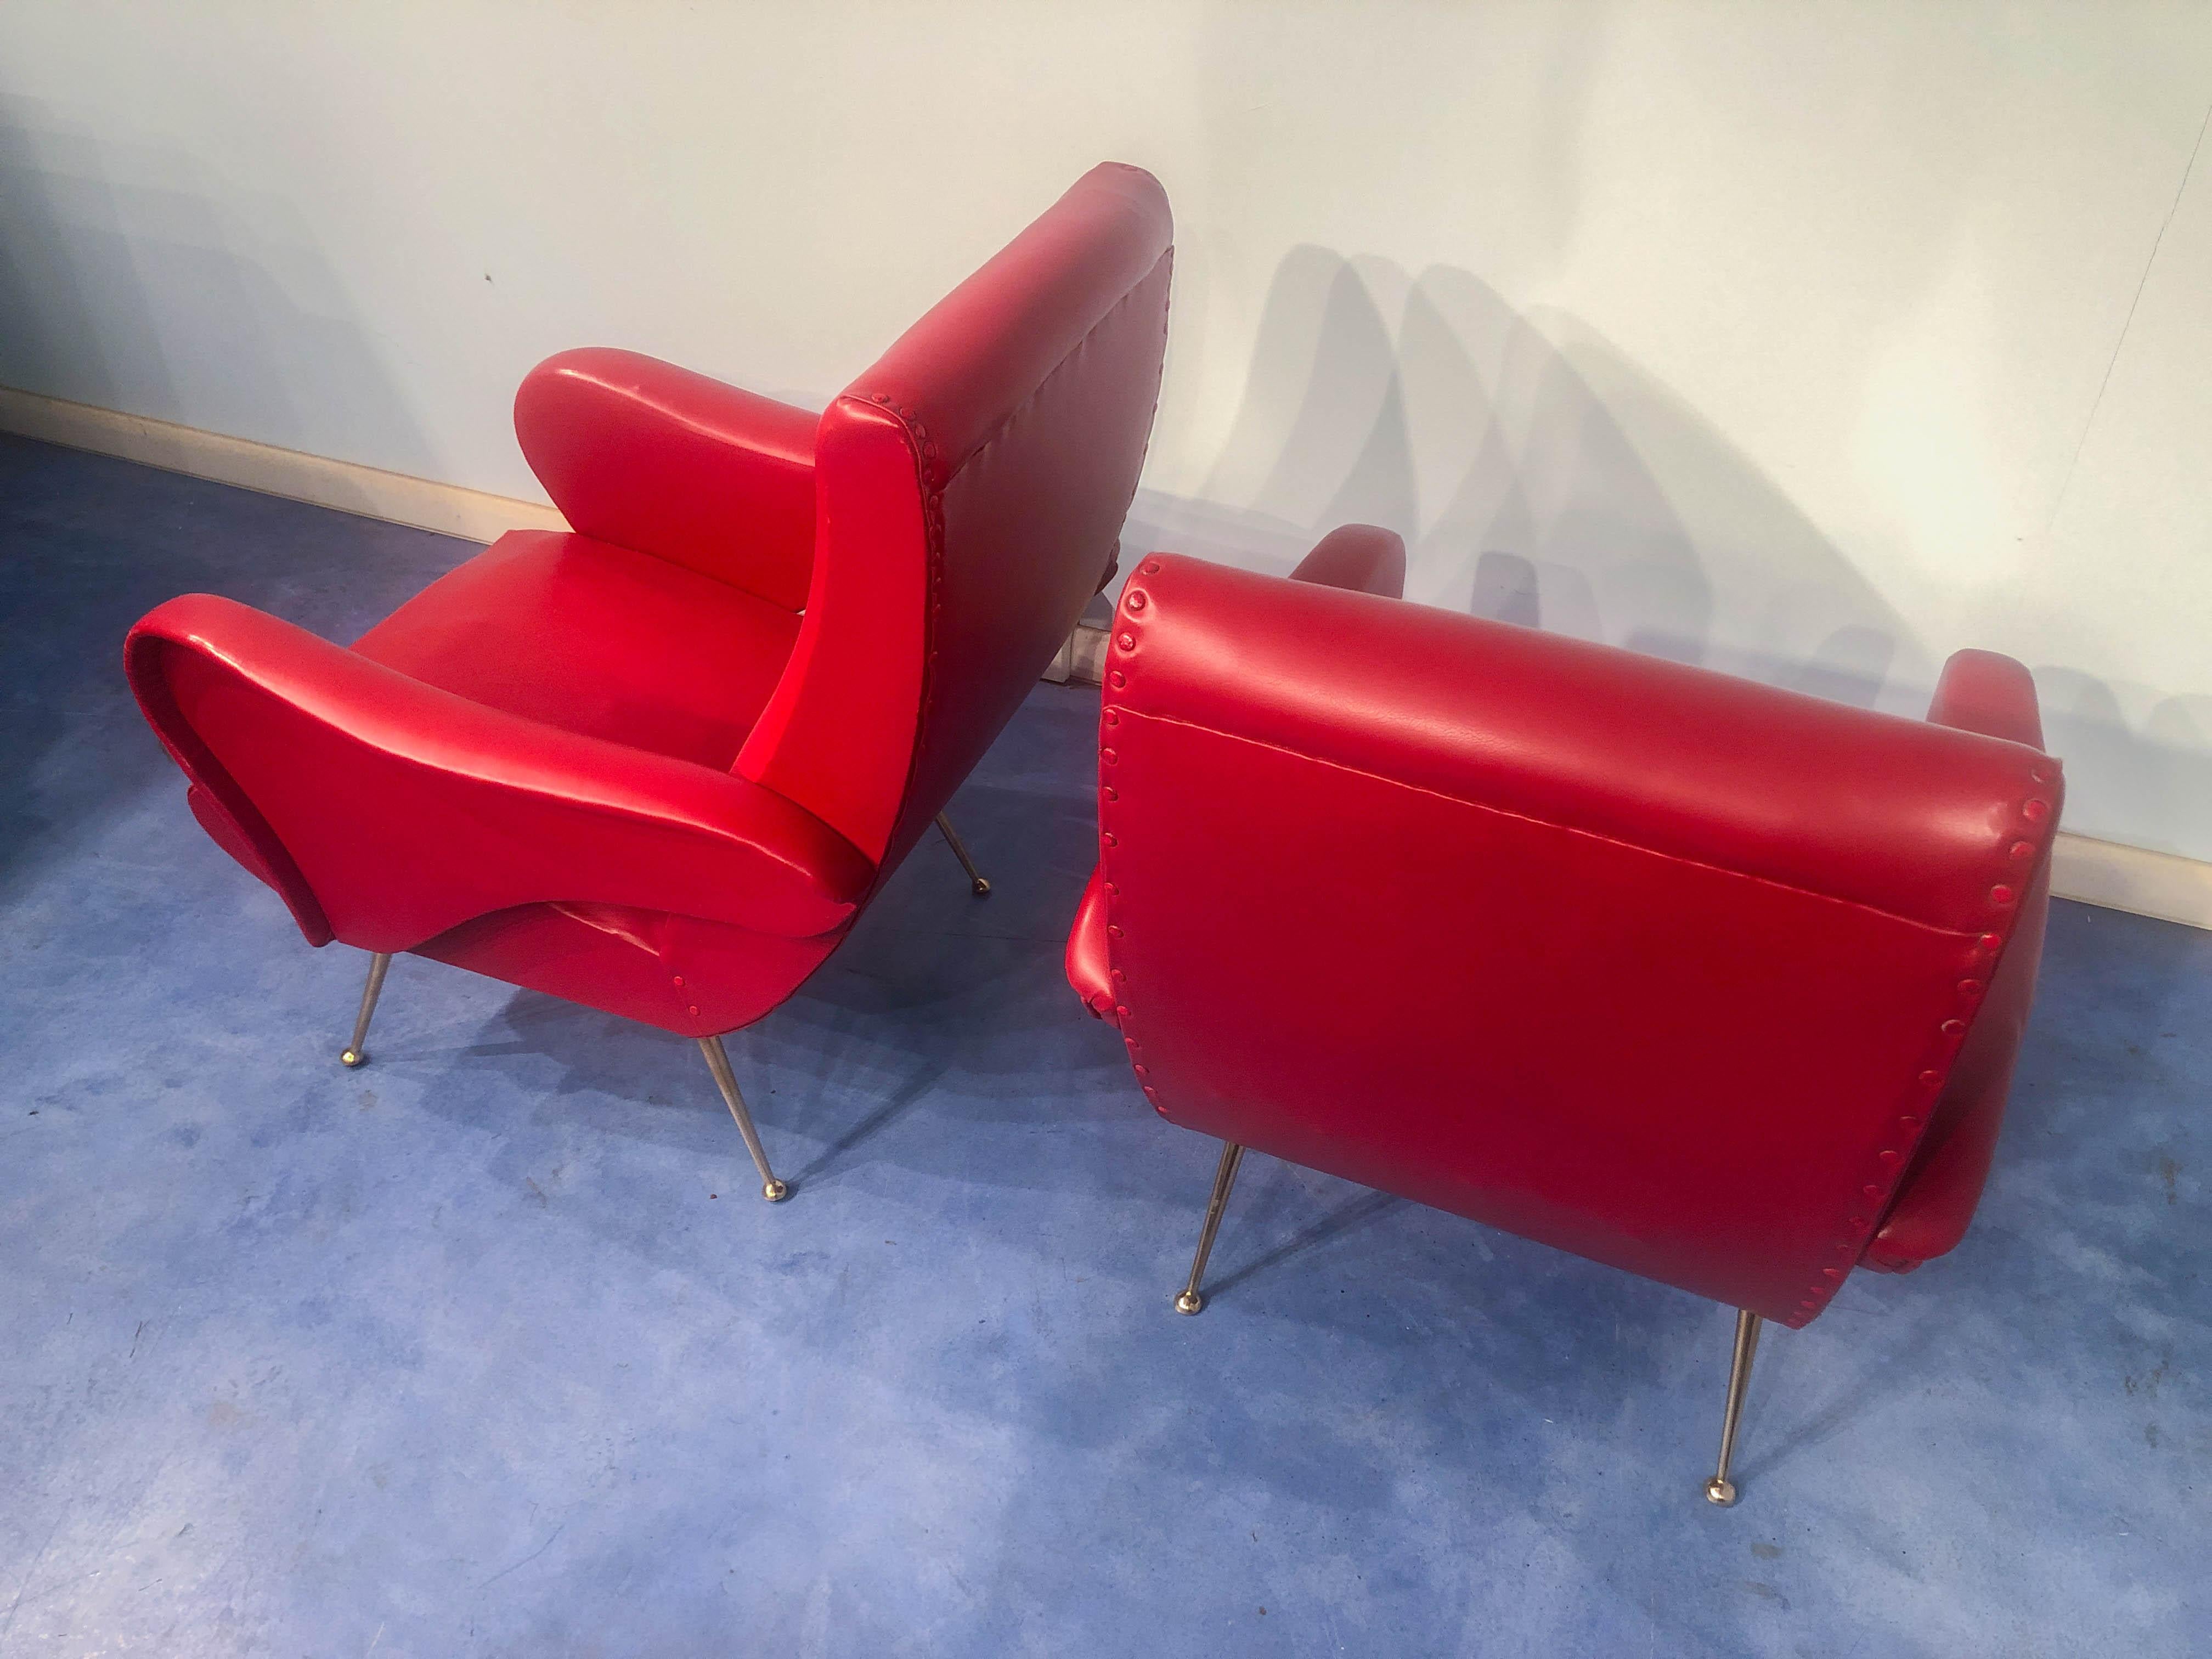 Faux Leather Pair of Italian Midcentury Modern Red Vinyl Armchairs, Nino Zoncada Style, 1950s